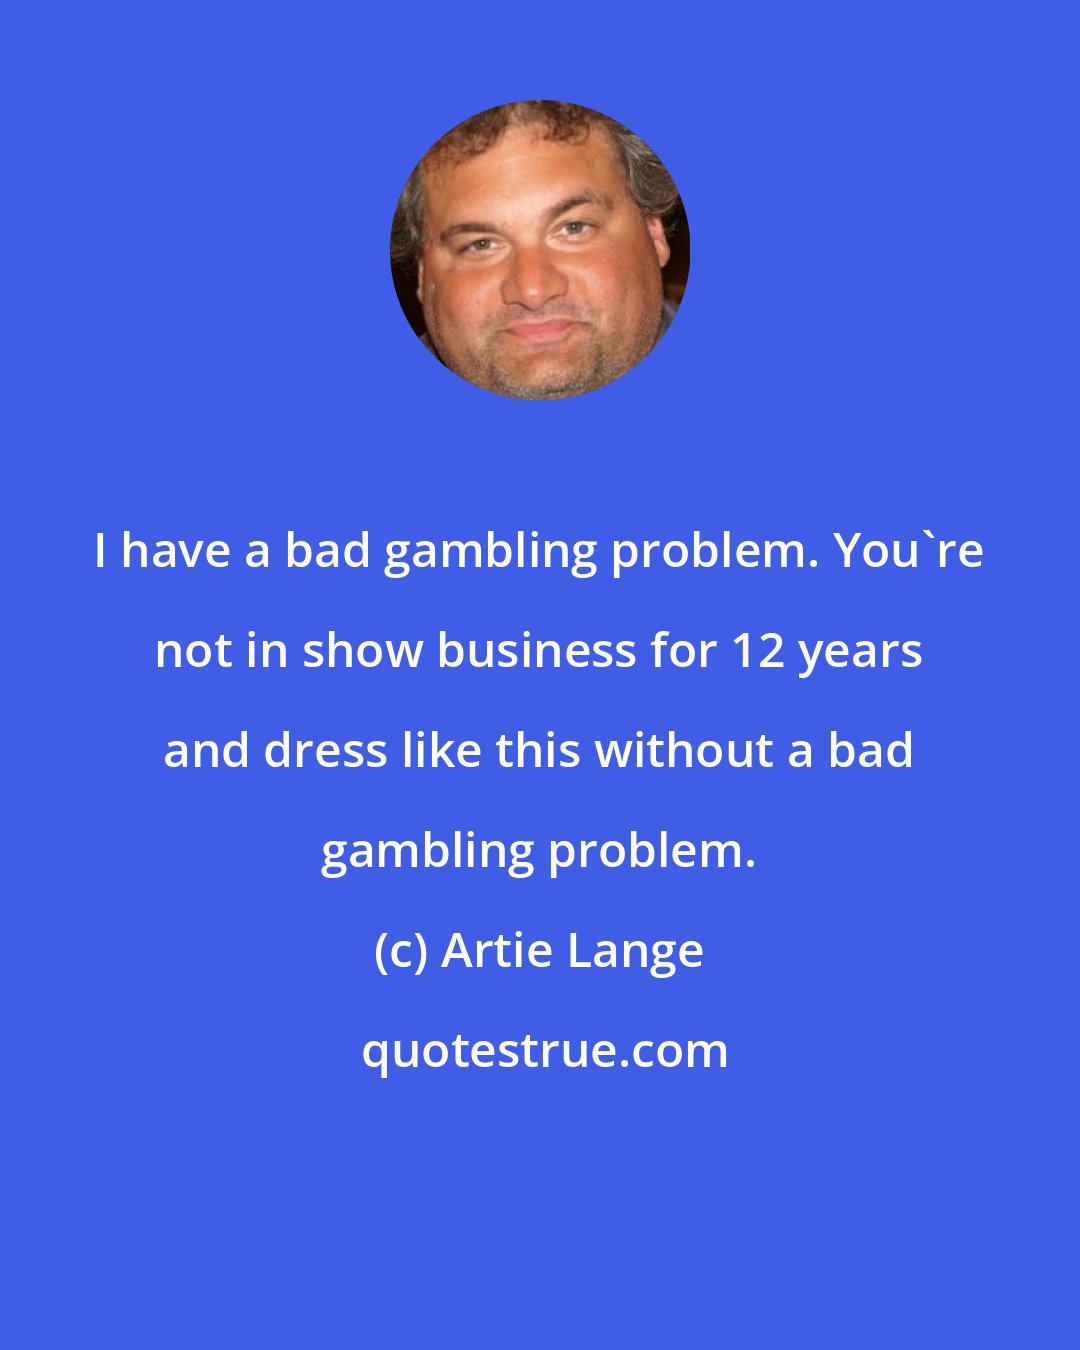 Artie Lange: I have a bad gambling problem. You're not in show business for 12 years and dress like this without a bad gambling problem.